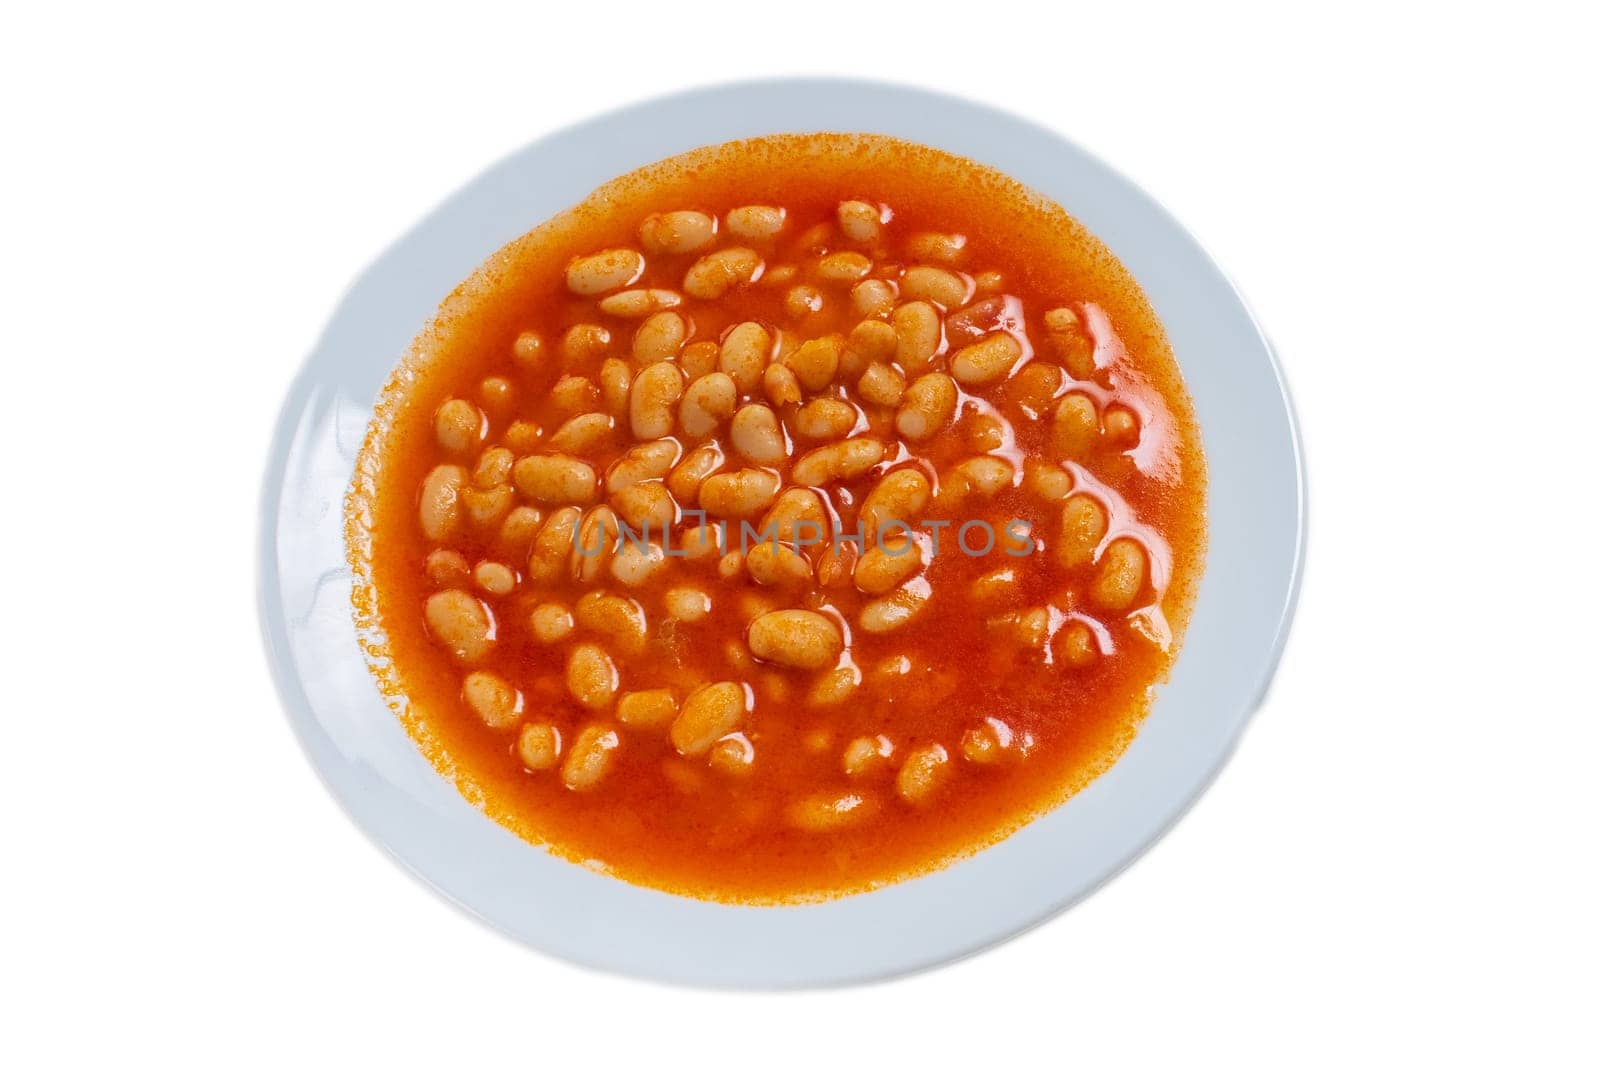 Photos of Turkey Famous and Delicious Homemade Dishes for Hotel Restaurant Orders and Menu and Internet and TV Advertising haricot bean. High quality photo